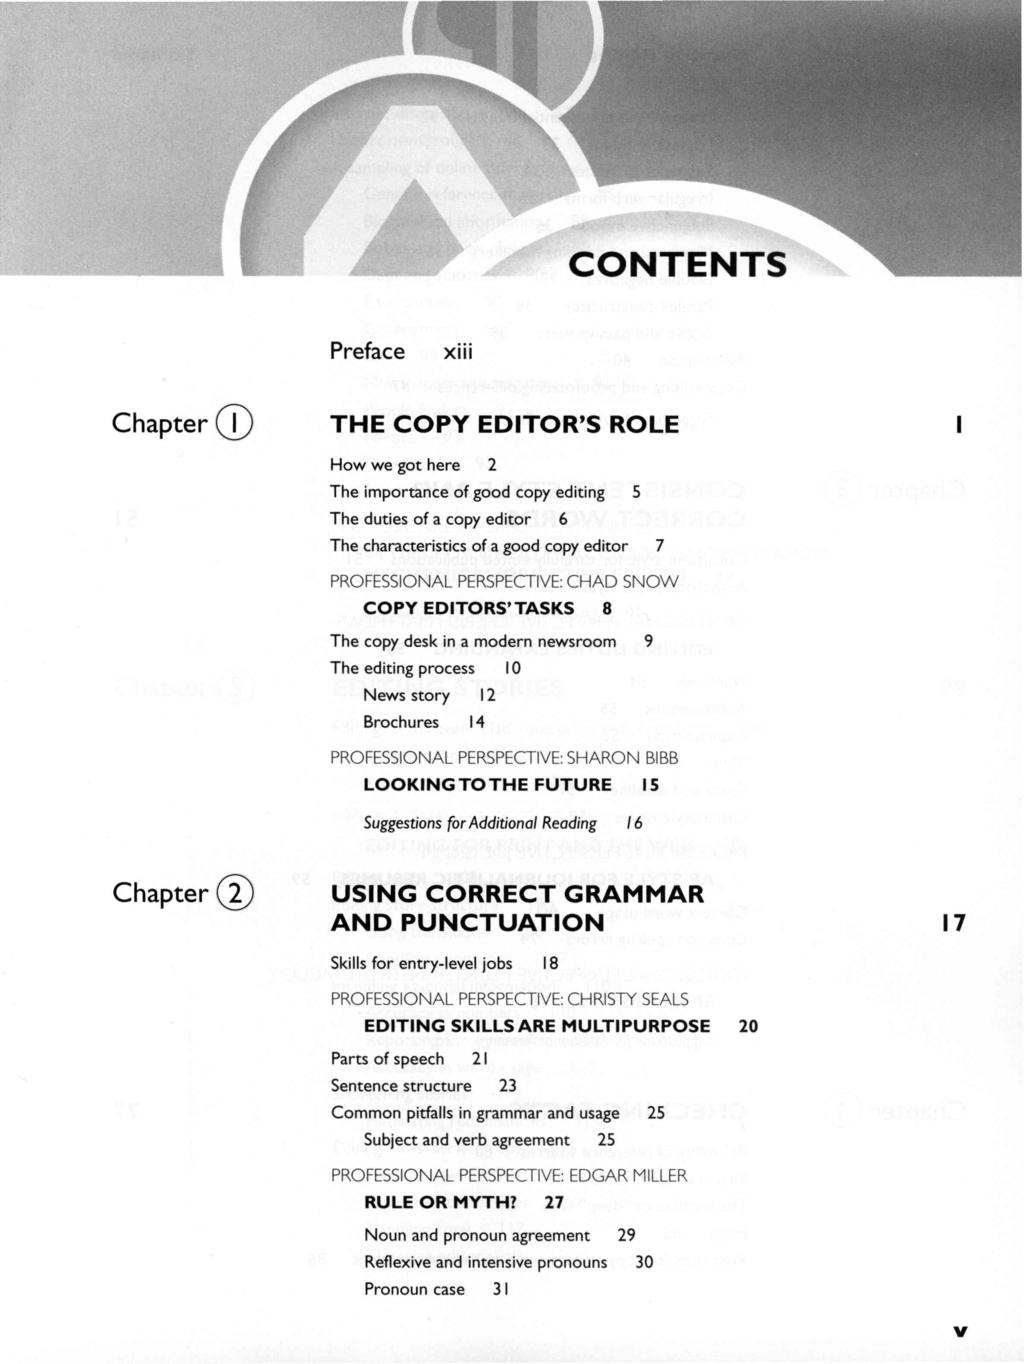 CONTENTS Chapter CD Preface xiii THE COPY EDITOR'S ROLE How we got here 2 The importance of good copy editing 5 The duties of a copy editor 6 The characteristics of a good copy editor 7 PROFESSIONAL